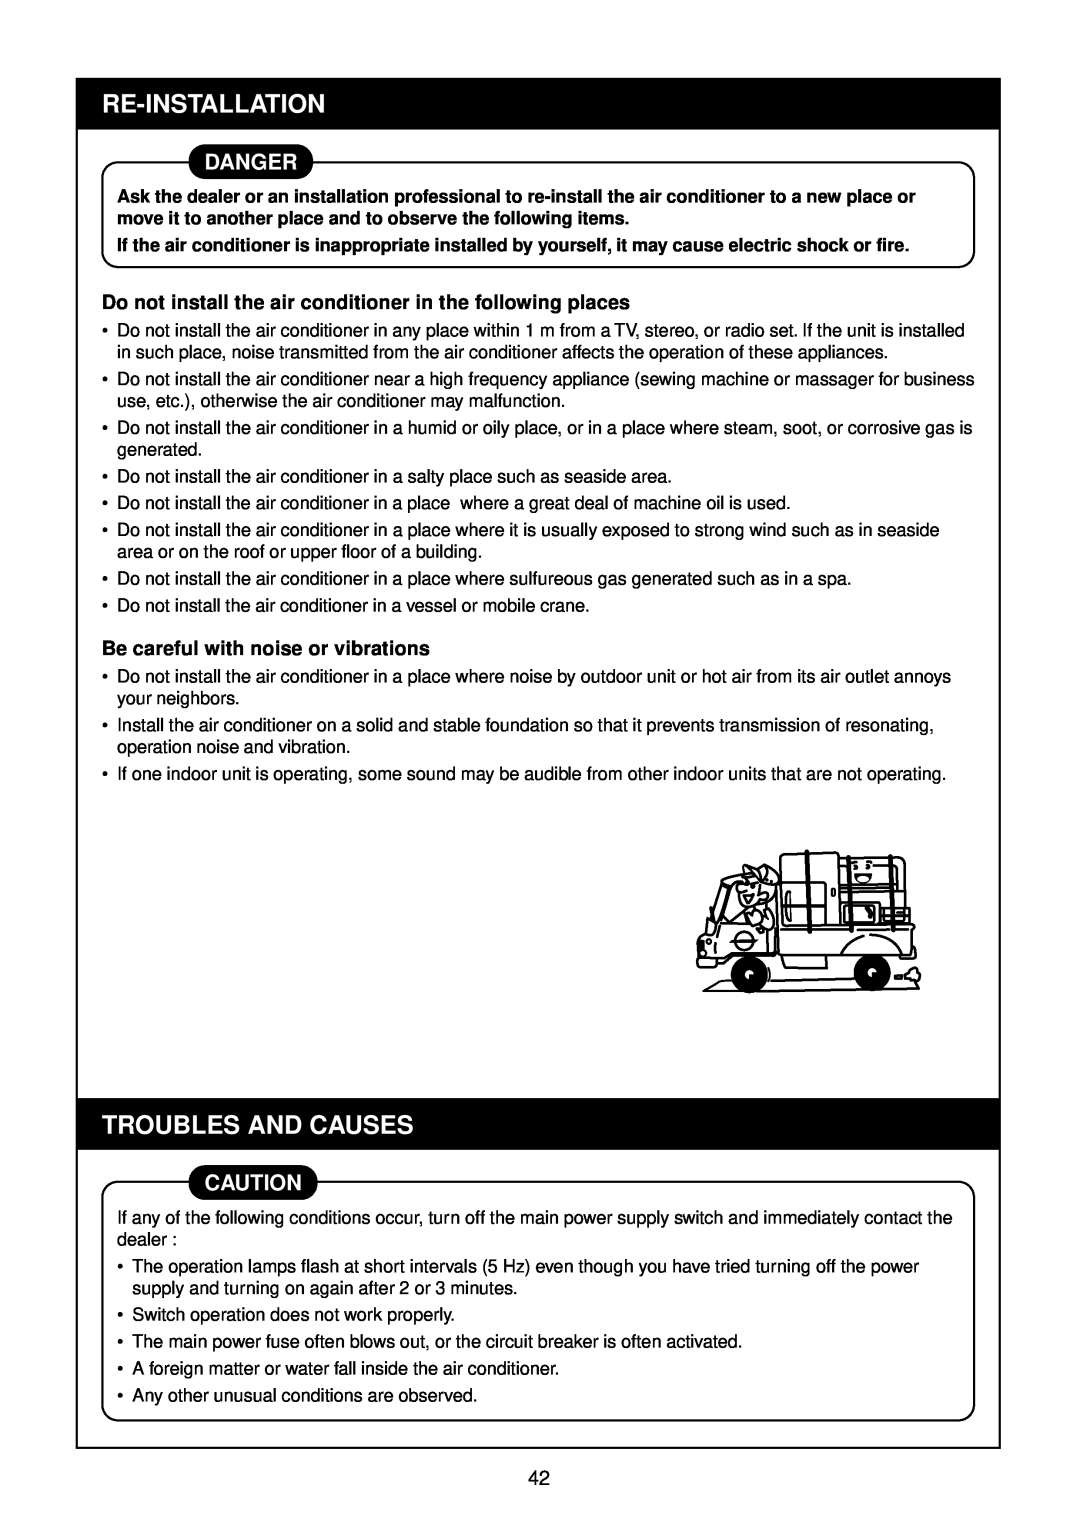 Toshiba R410A service manual Re-Installation, Troubles And Causes, Danger, Be careful with noise or vibrations 